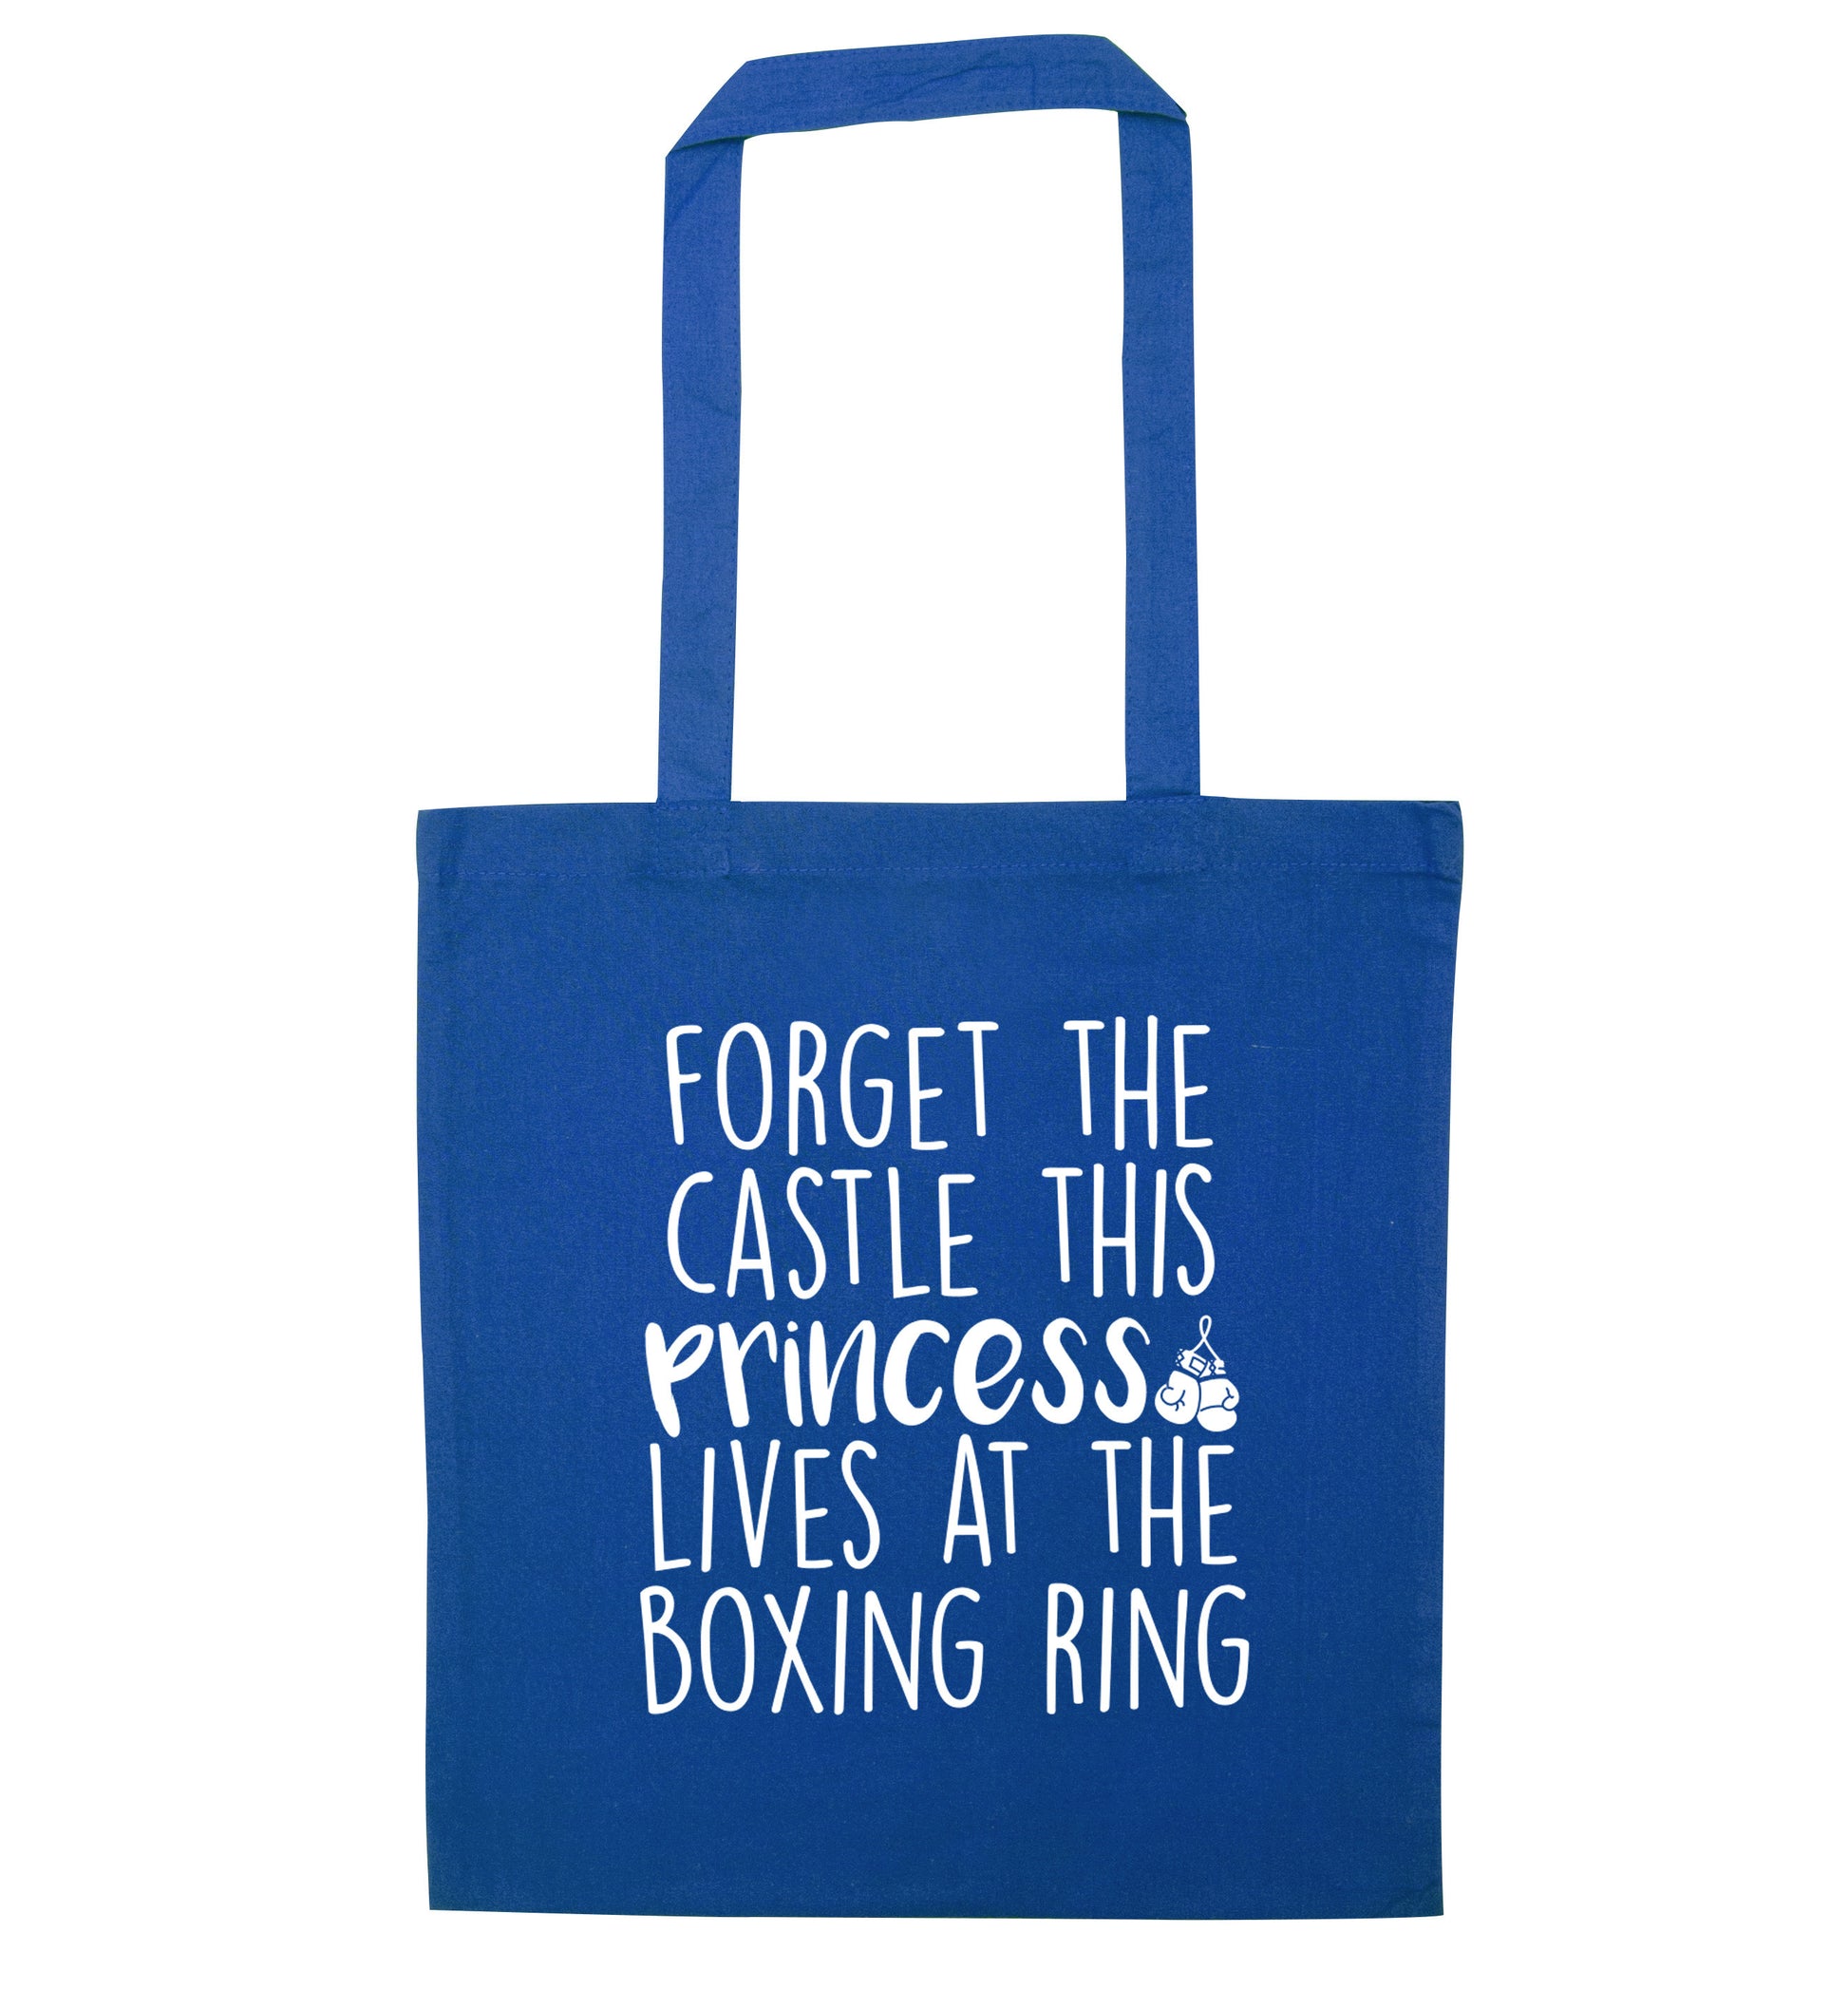 Forget the castle this princess lives at the boxing ring blue tote bag